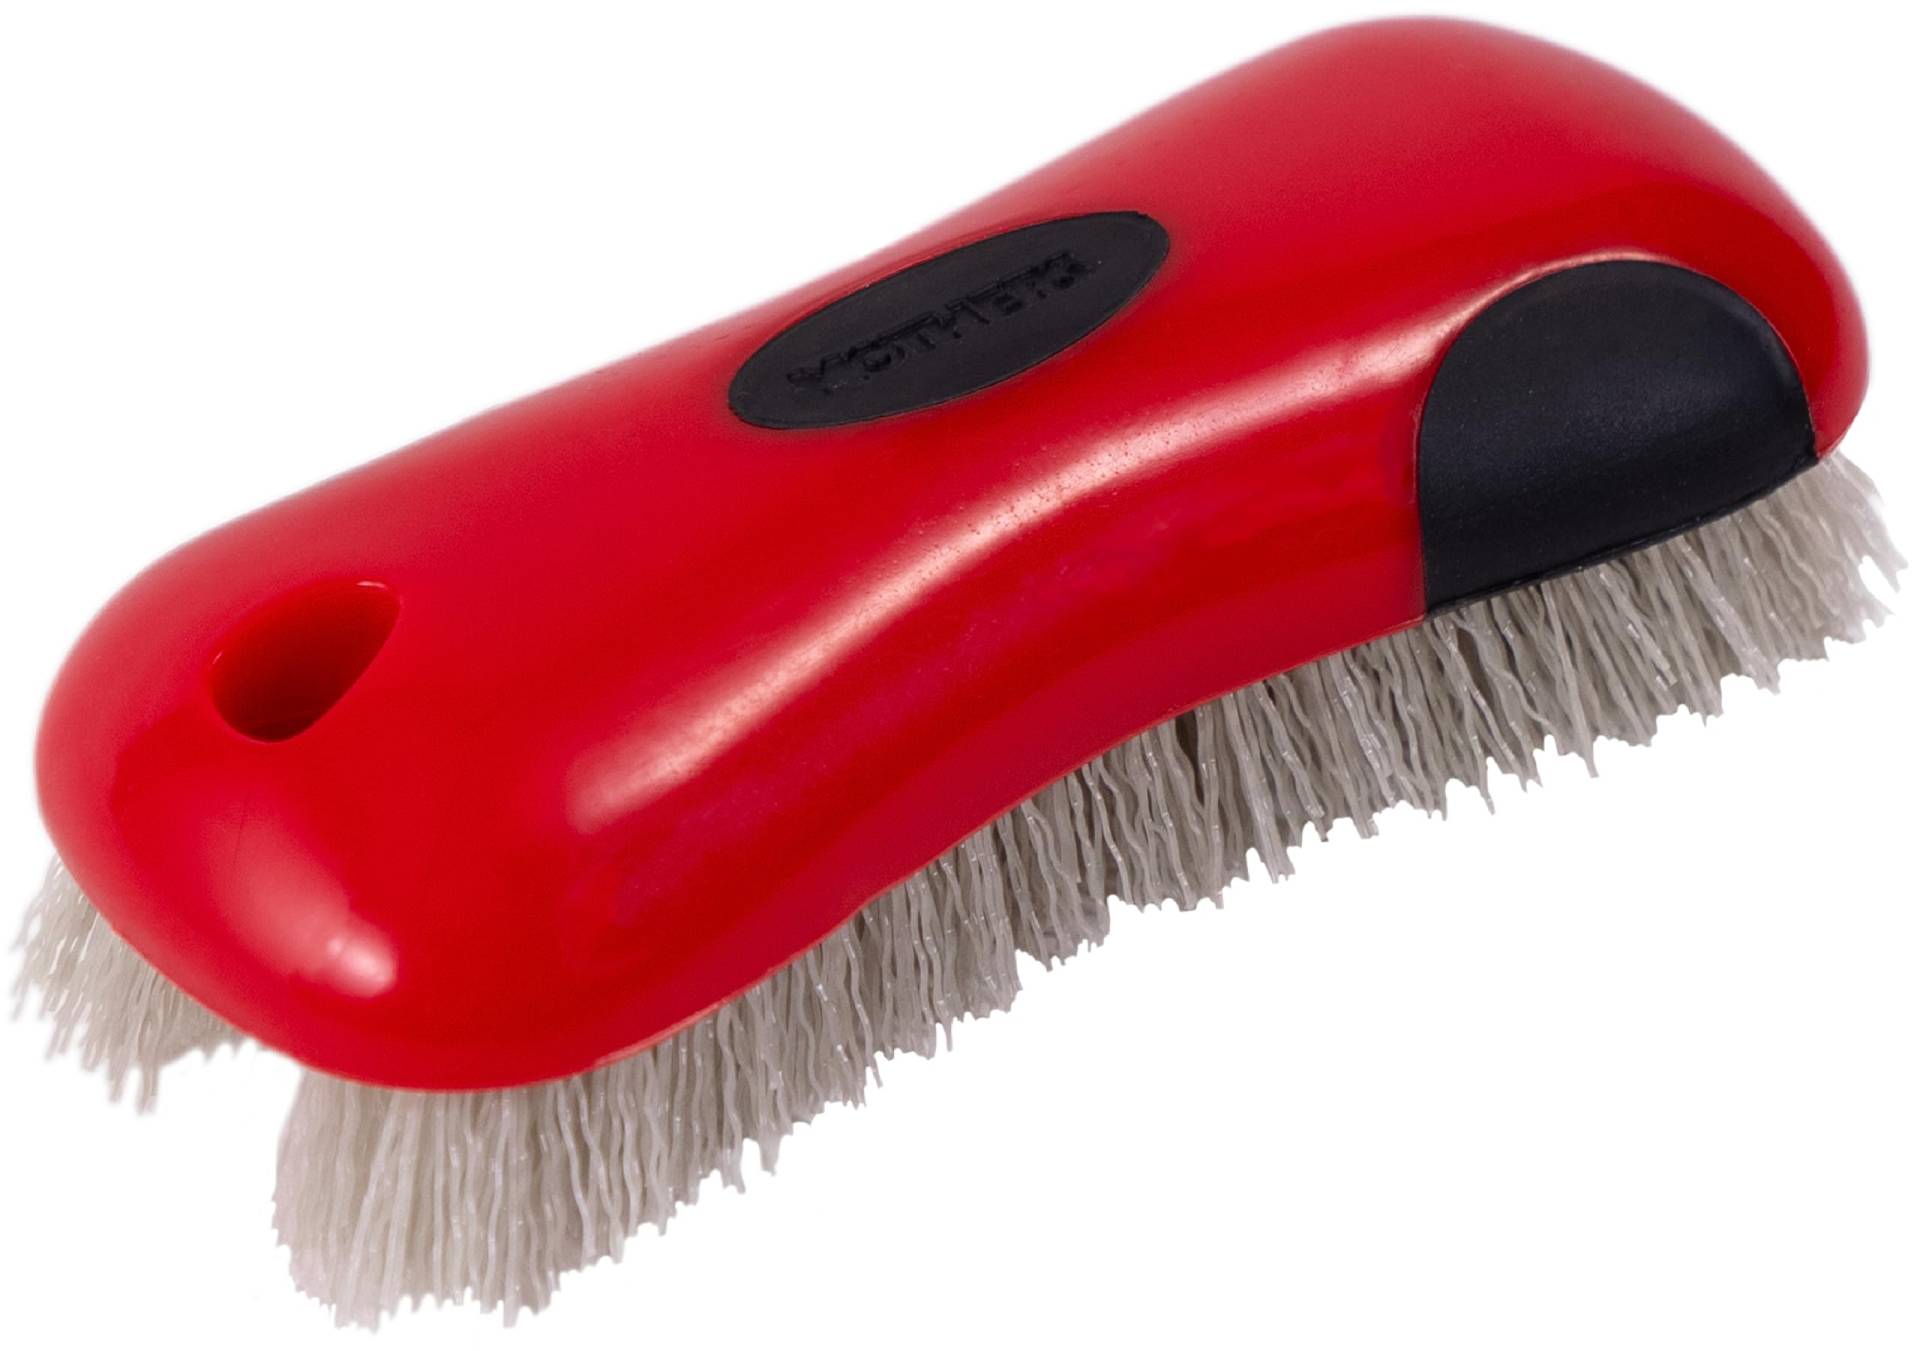 MOTHERS 155900 Carpet and Upholstery Brush - Teppich und Polsterbürste von MOTHERS